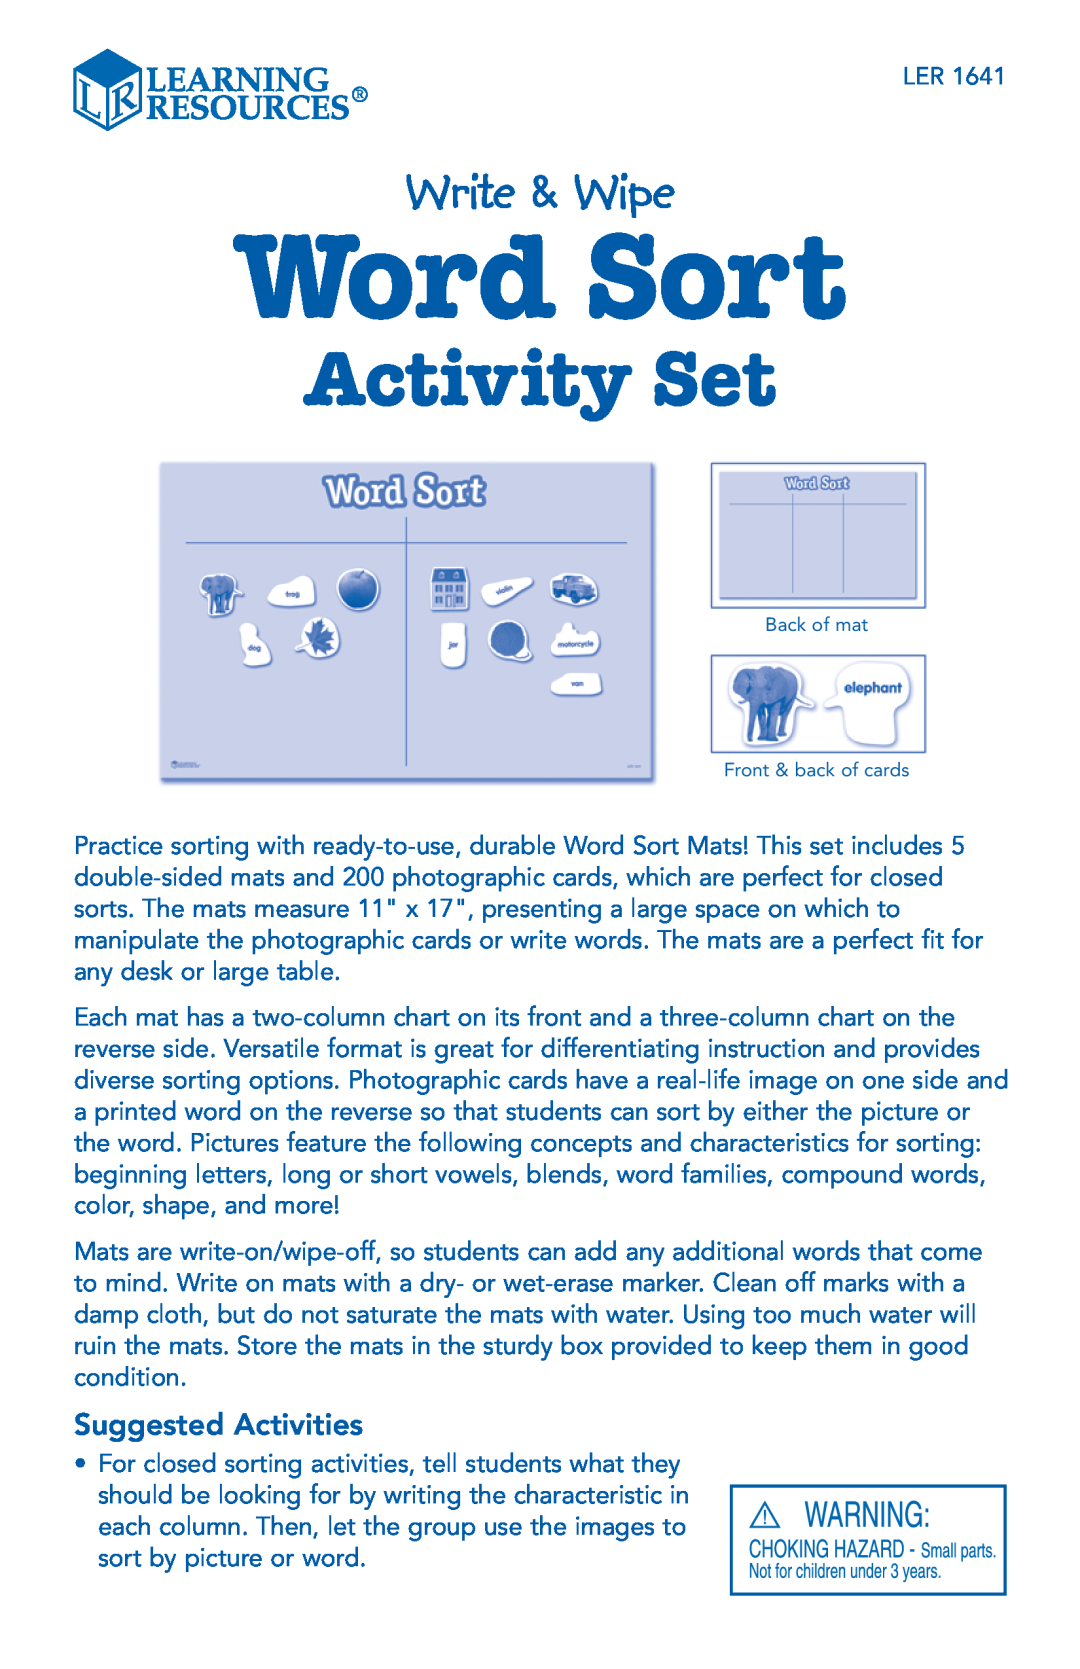 Learning Resources LER 1641 manual Suggested Activities, Word Sort, Activity Set, Write & Wipe 